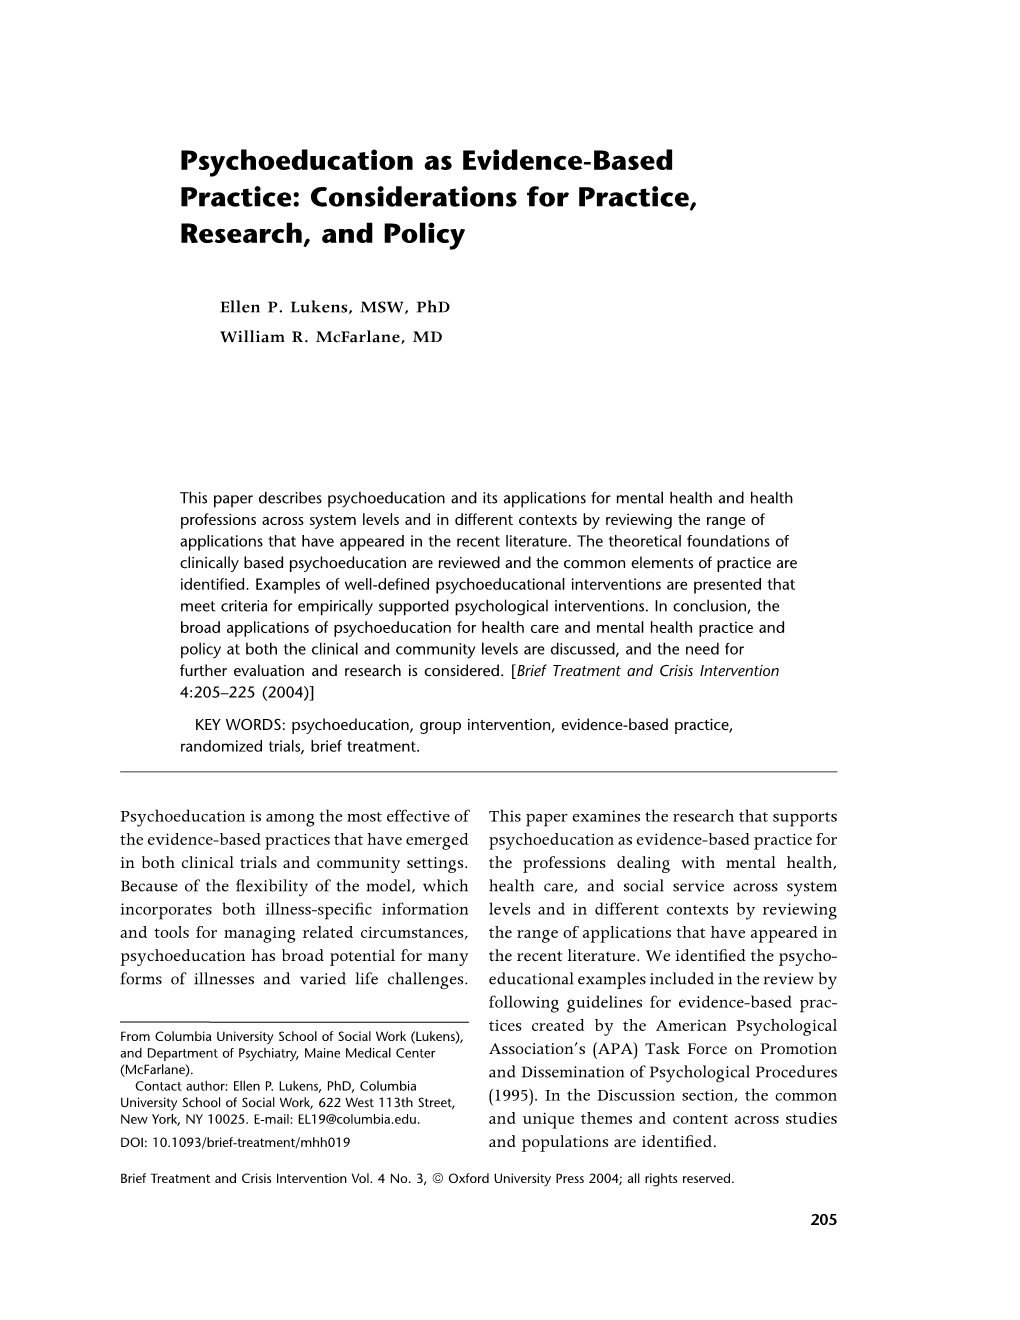 Psychoeducation As Evidence-Based Practice: Considerations for Practice, Research, and Policy